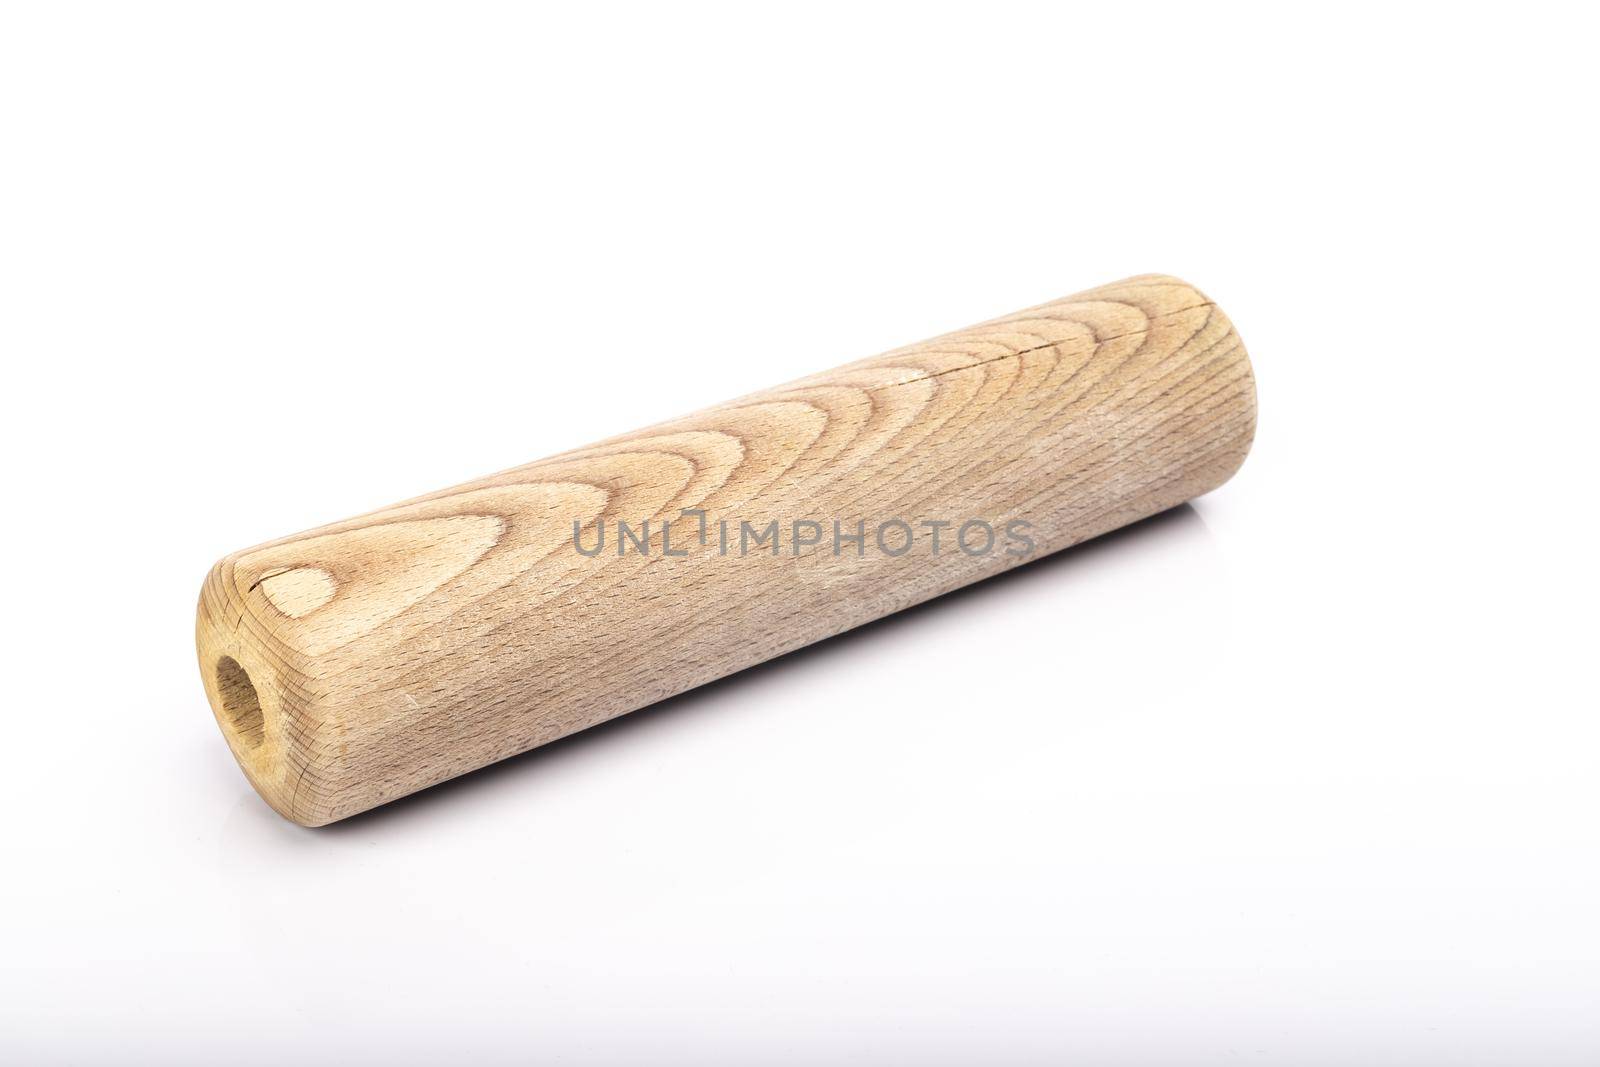 wooden rolling pin on white background in studio